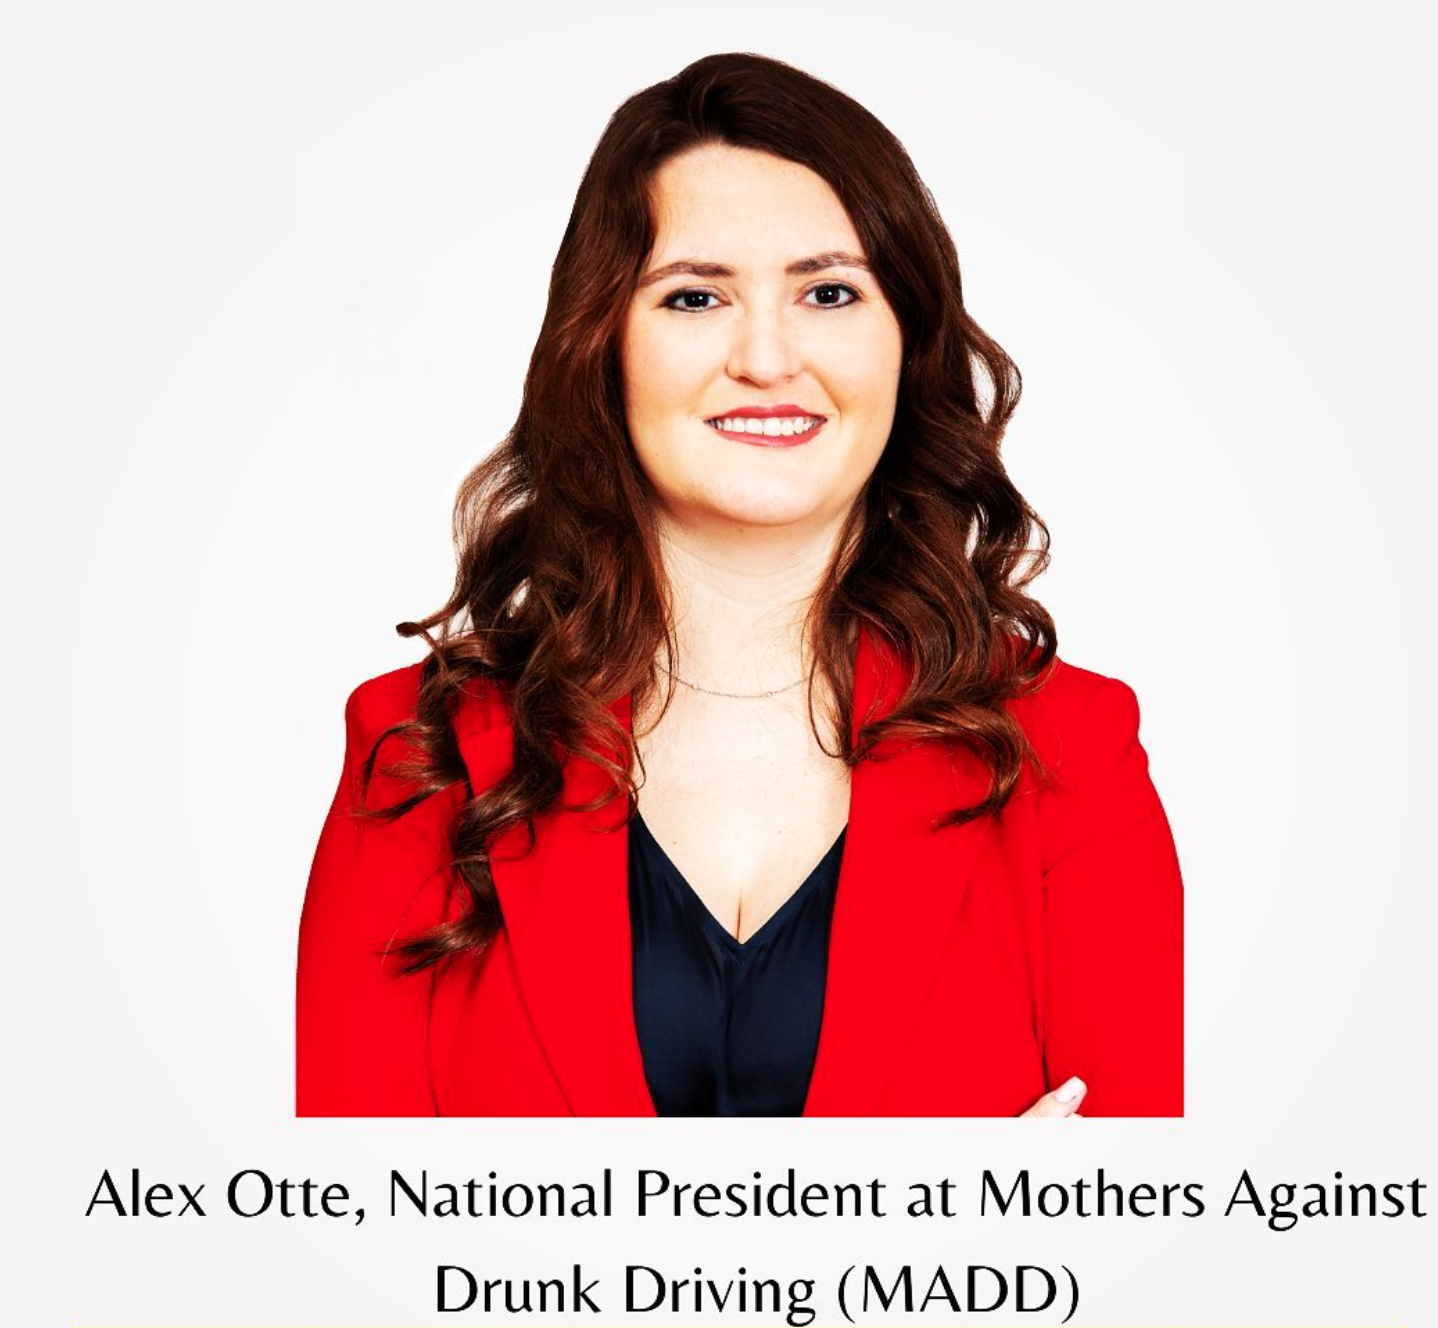 #184 Alex Otte, National President at Mothers Against Drunk Driving (MADD)